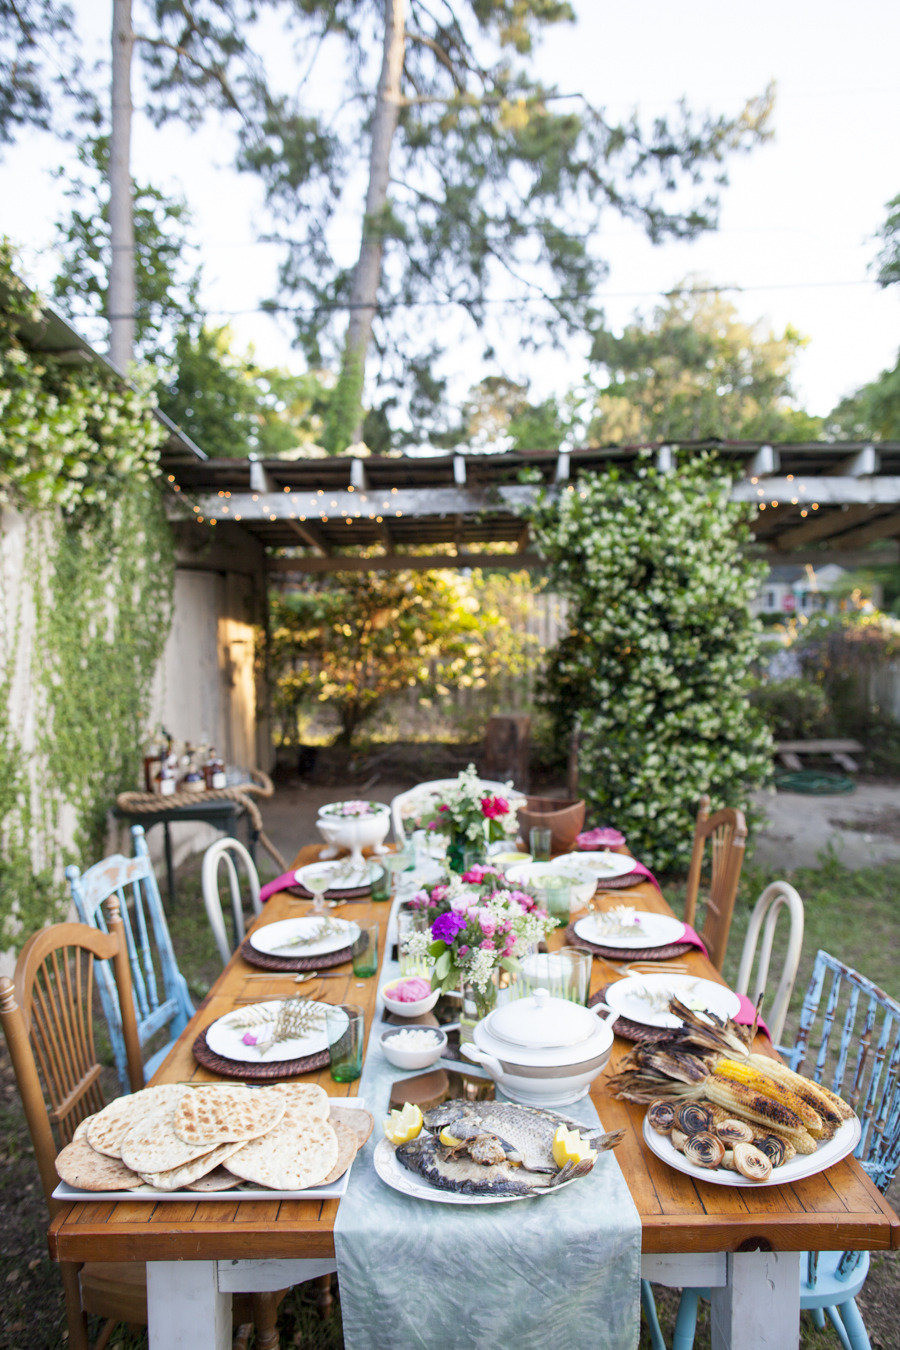 Backyard Party Ideas Decorating
 50 Outdoor Party Ideas You Should Try Out This Summer